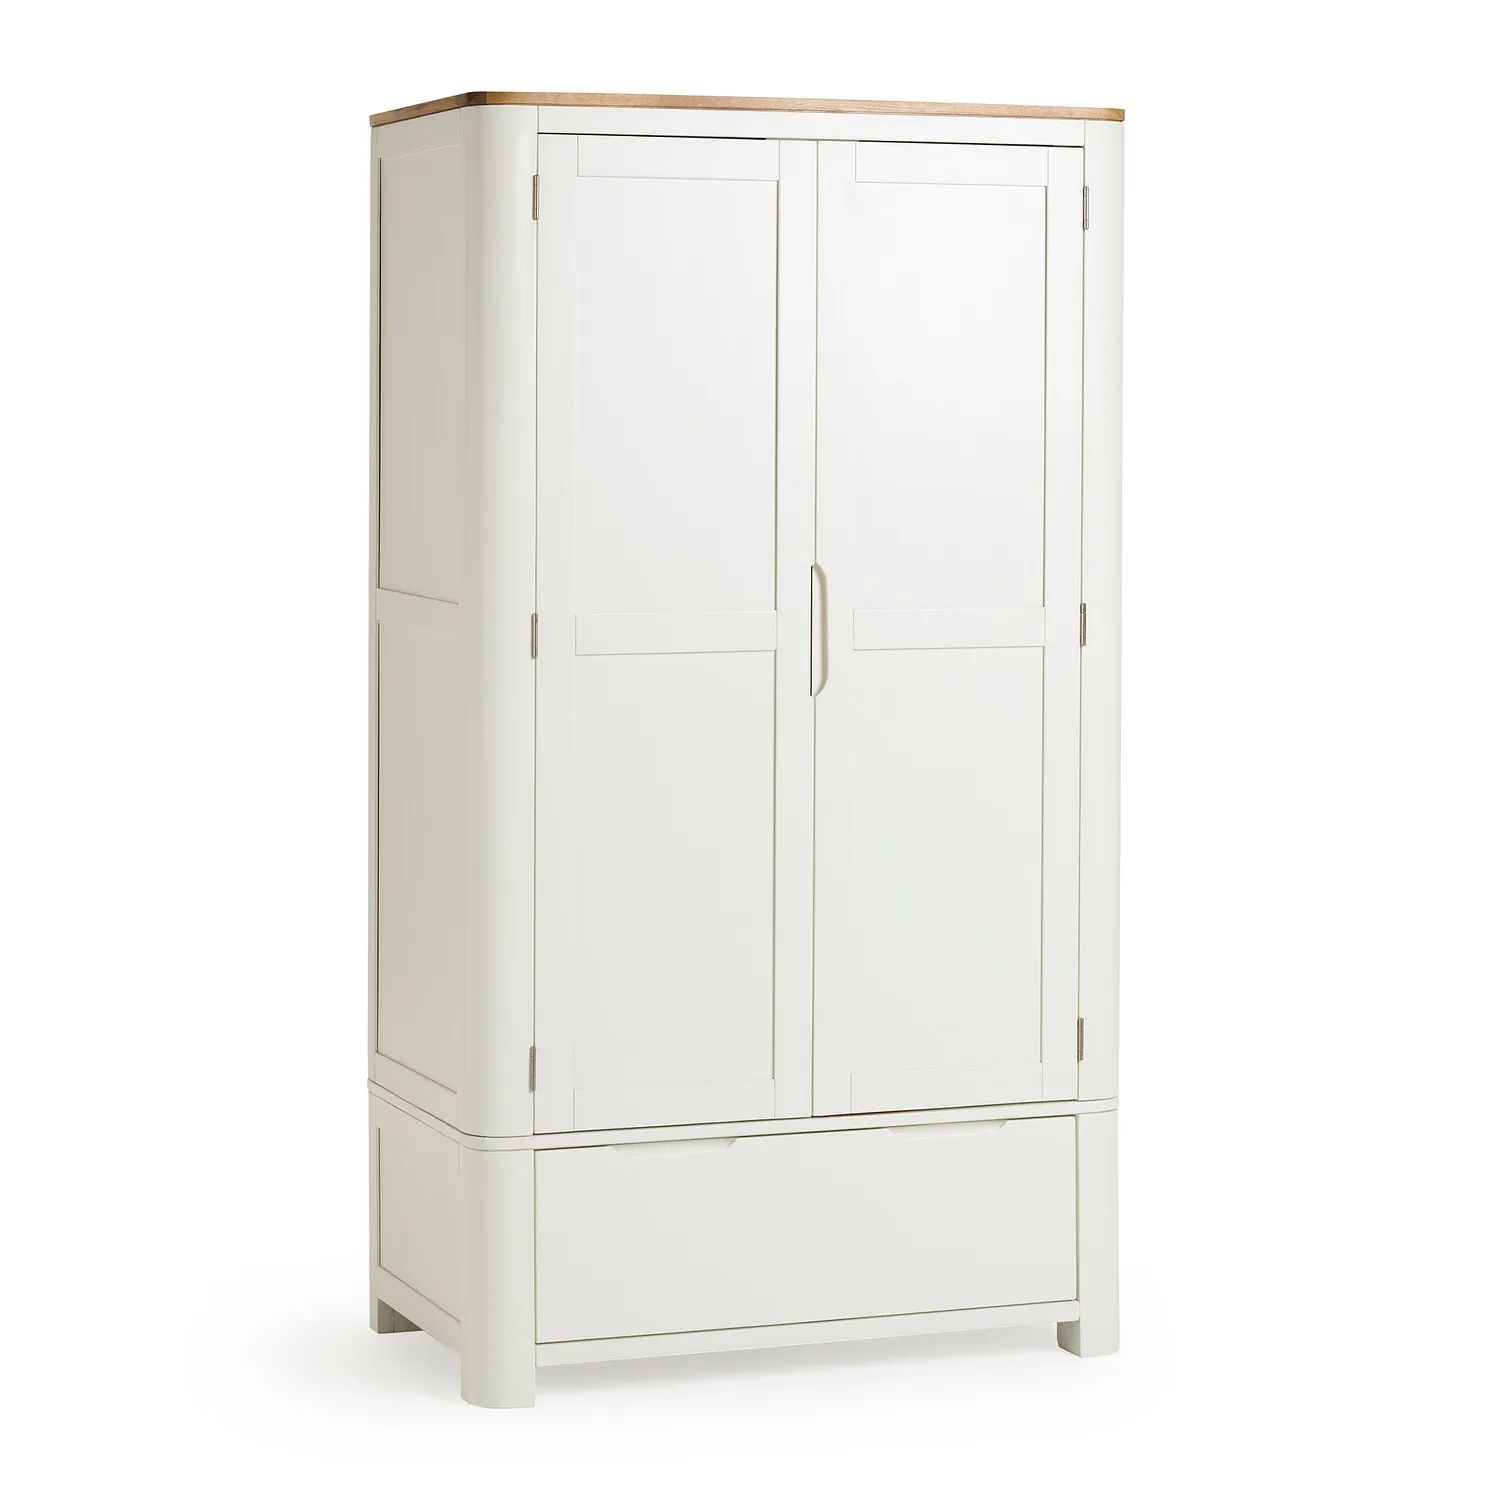 Hove Natural Oak and Painted Double Wardrobe RRP £849.99